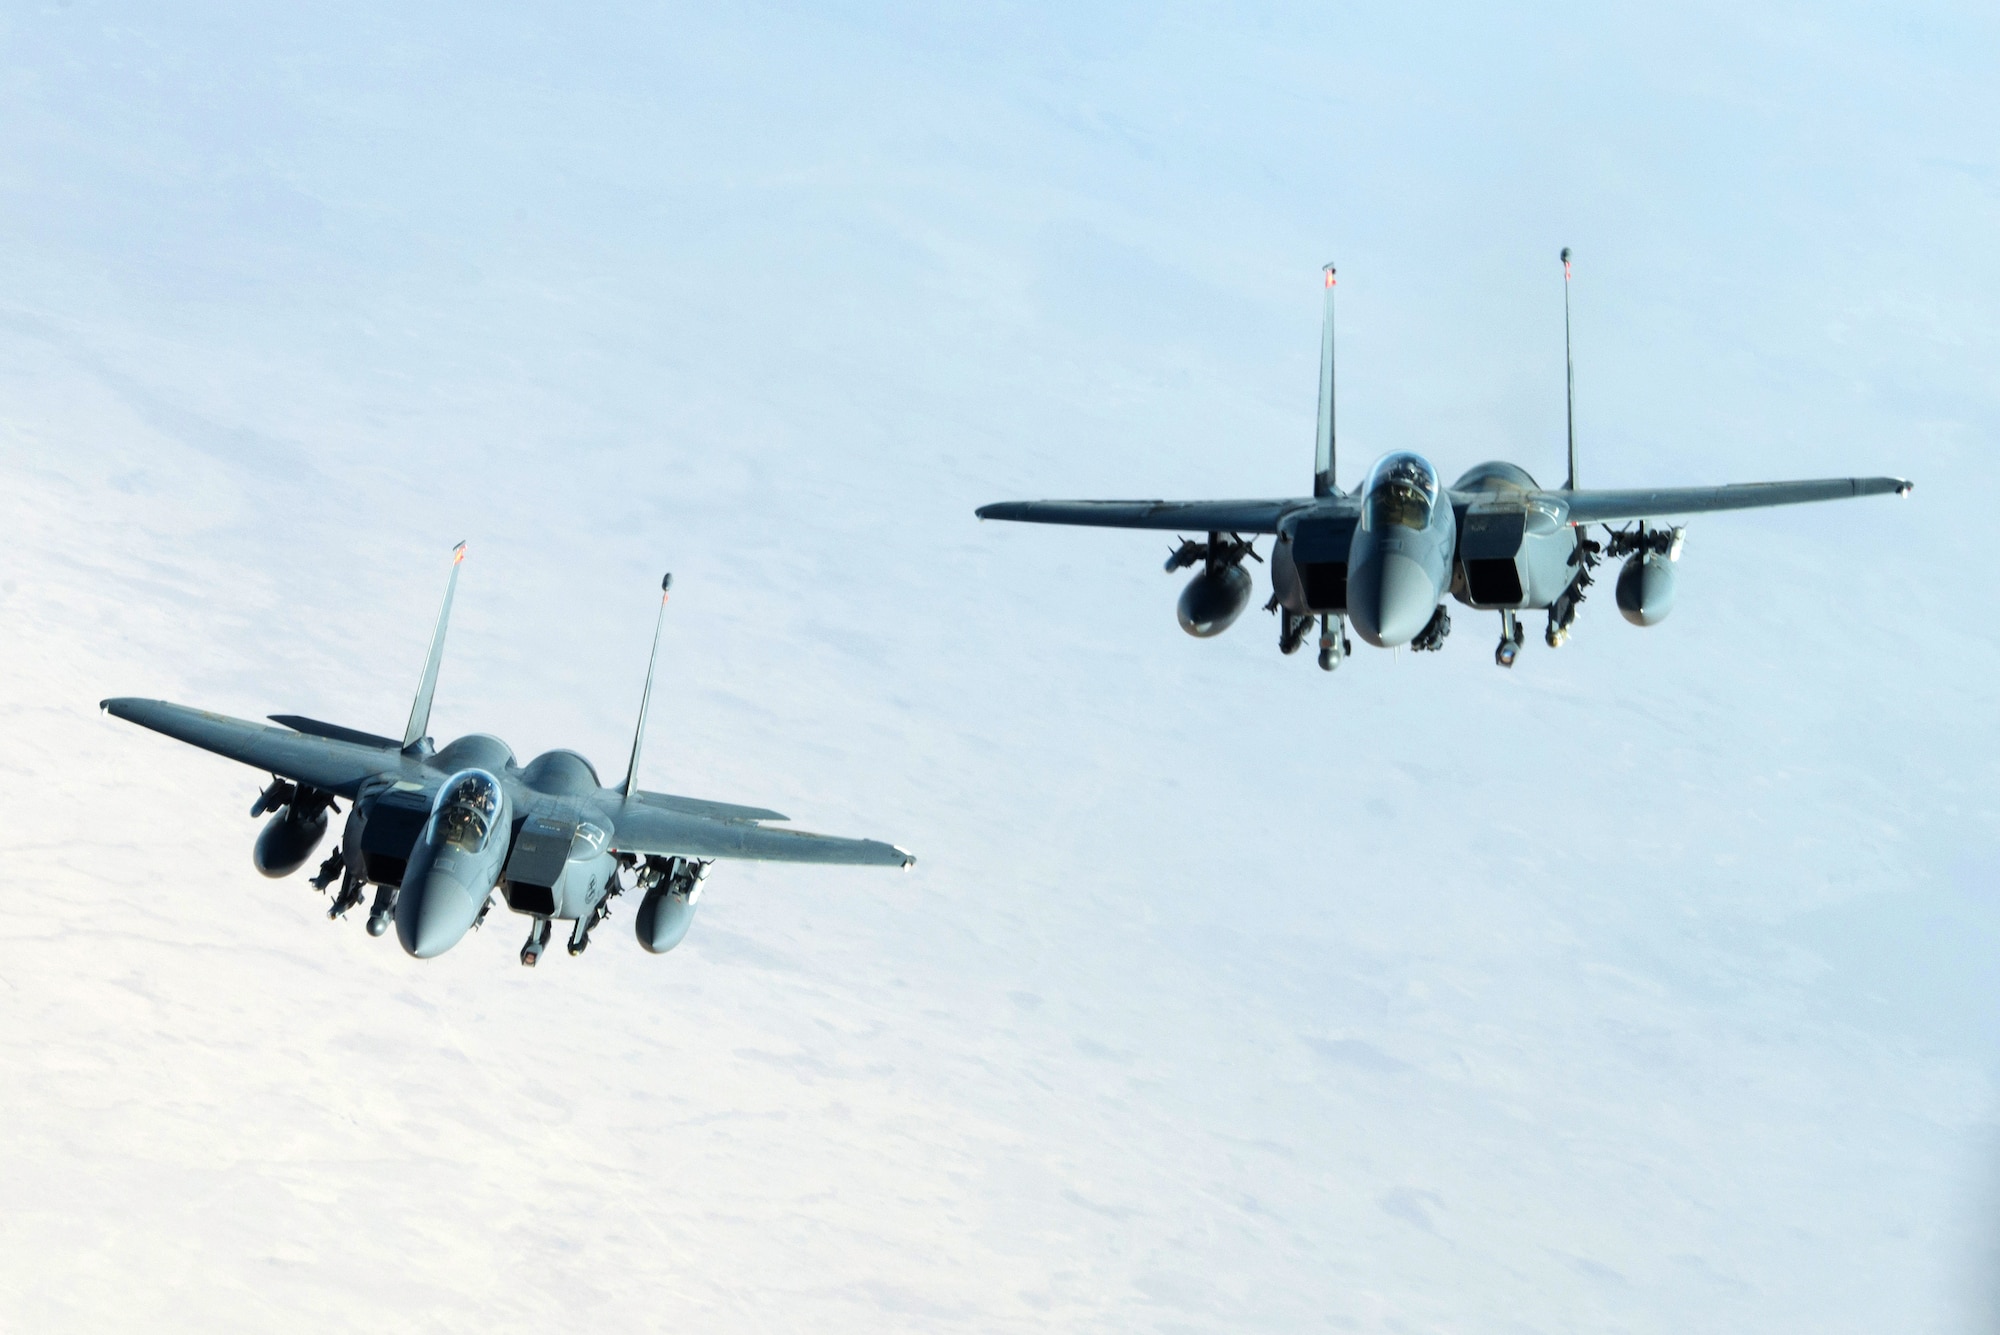 Two U.S. Air Force F-15E Strike Eagles fly in formation near Mosul, Iraq, Nov. 20, 2016. To date, Coalition forces have flown thousands of combat sorties using a wide range of strike aircraft to dismantle, disrupt and ultimately destroy Da'esh by striking infrastructure, roadways and other high-value targets. (U.S. Air Force photo by Staff Sgt. R. Alex Durbin)